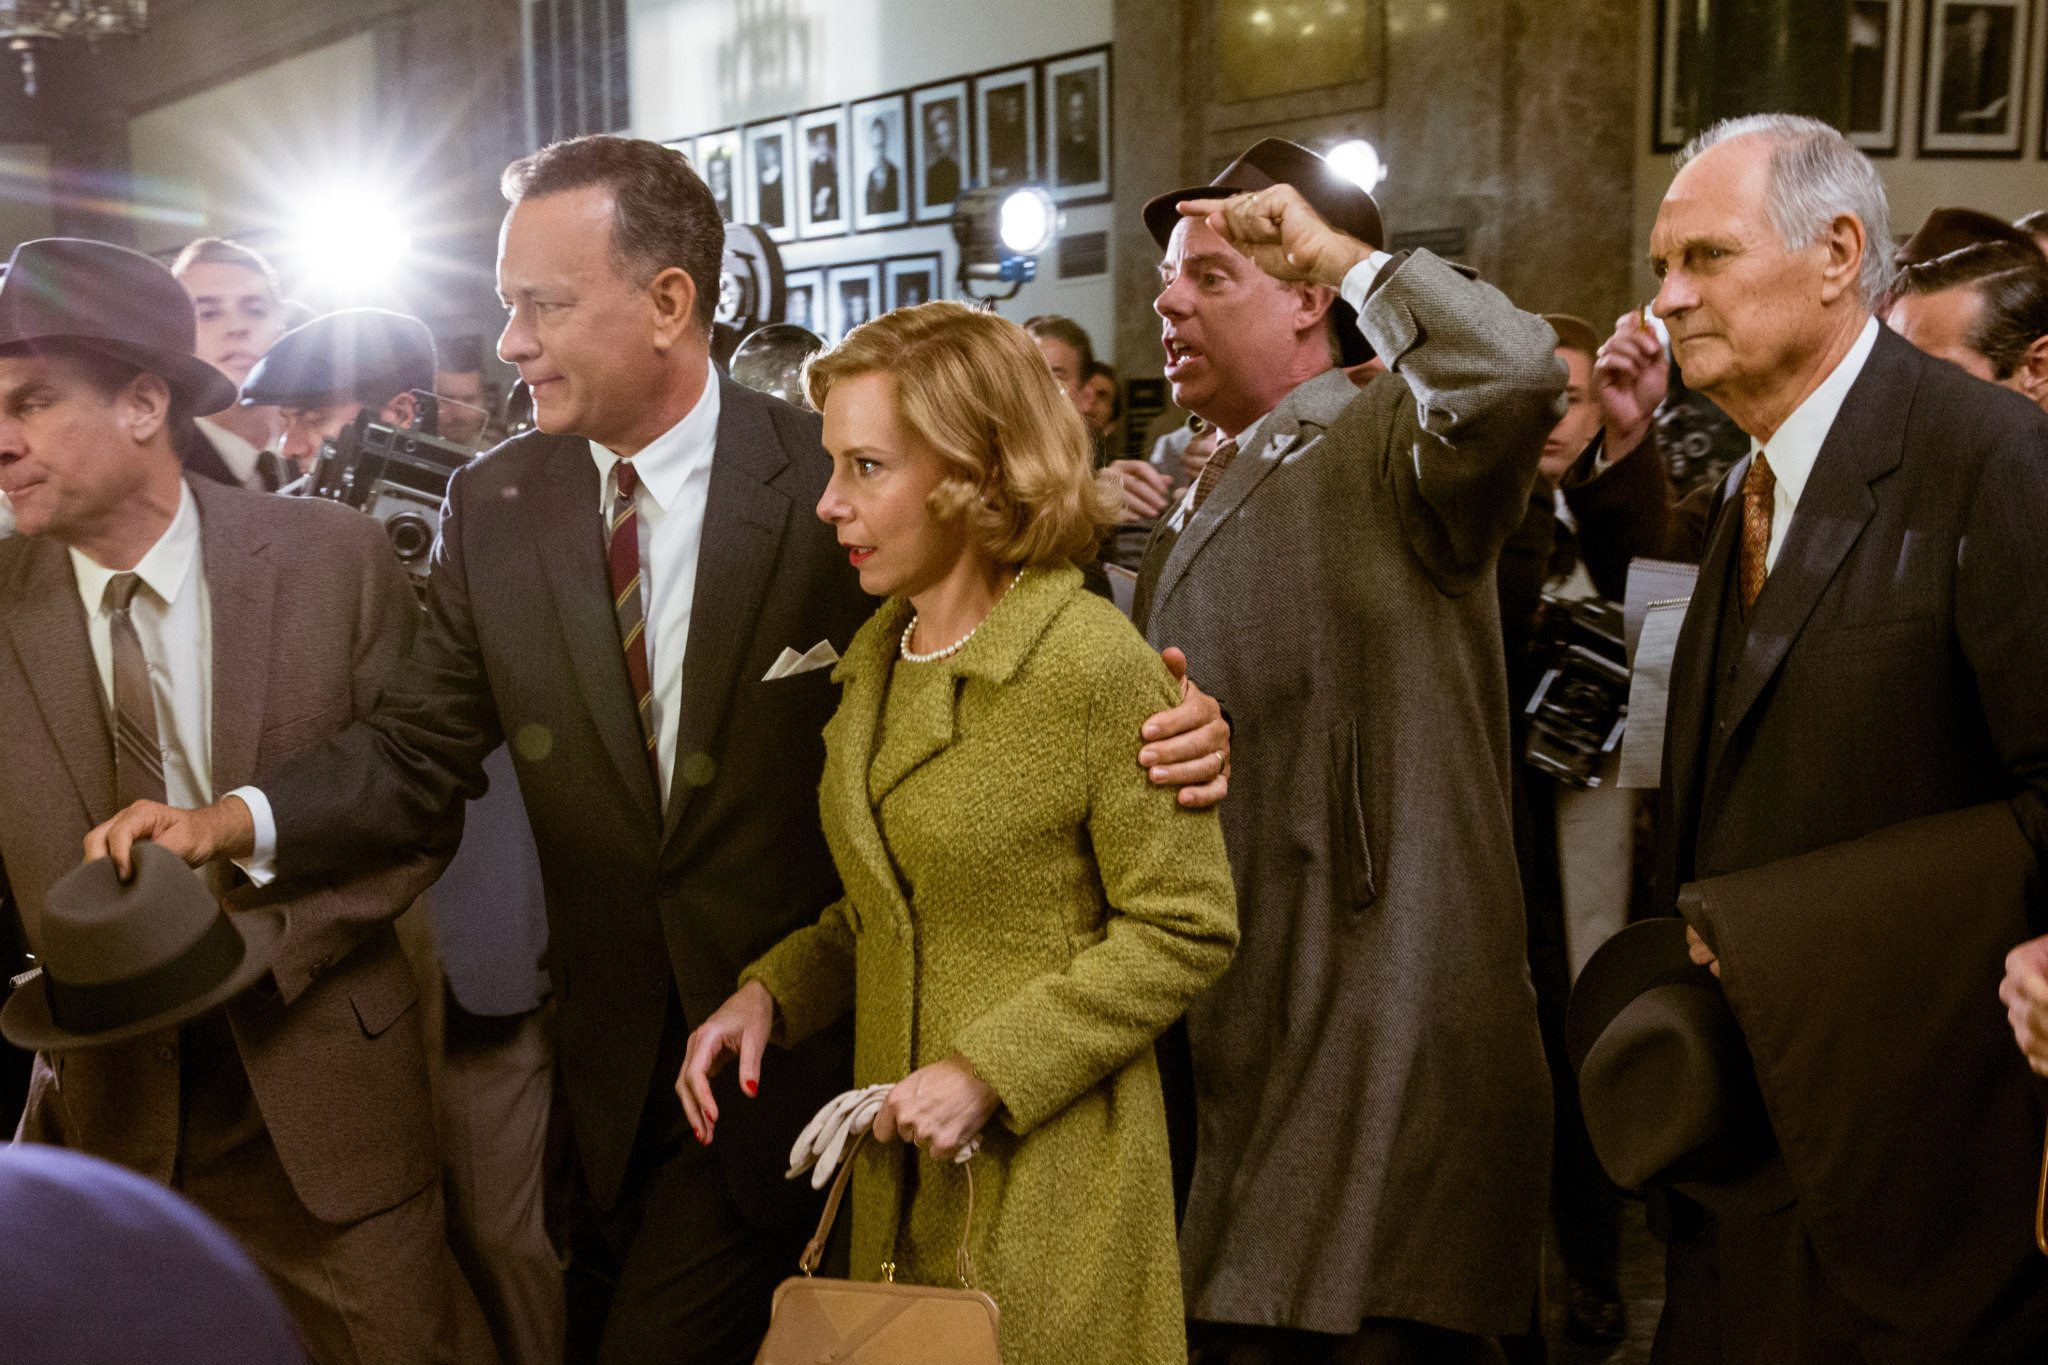  Brooklyn lawyer James Donovan (Tom Hanks) and his wife Mary (Amy Ryan) become the target of anti-communist fears when Donovan agrees to defend a Soviet agent arrested in the U.S.